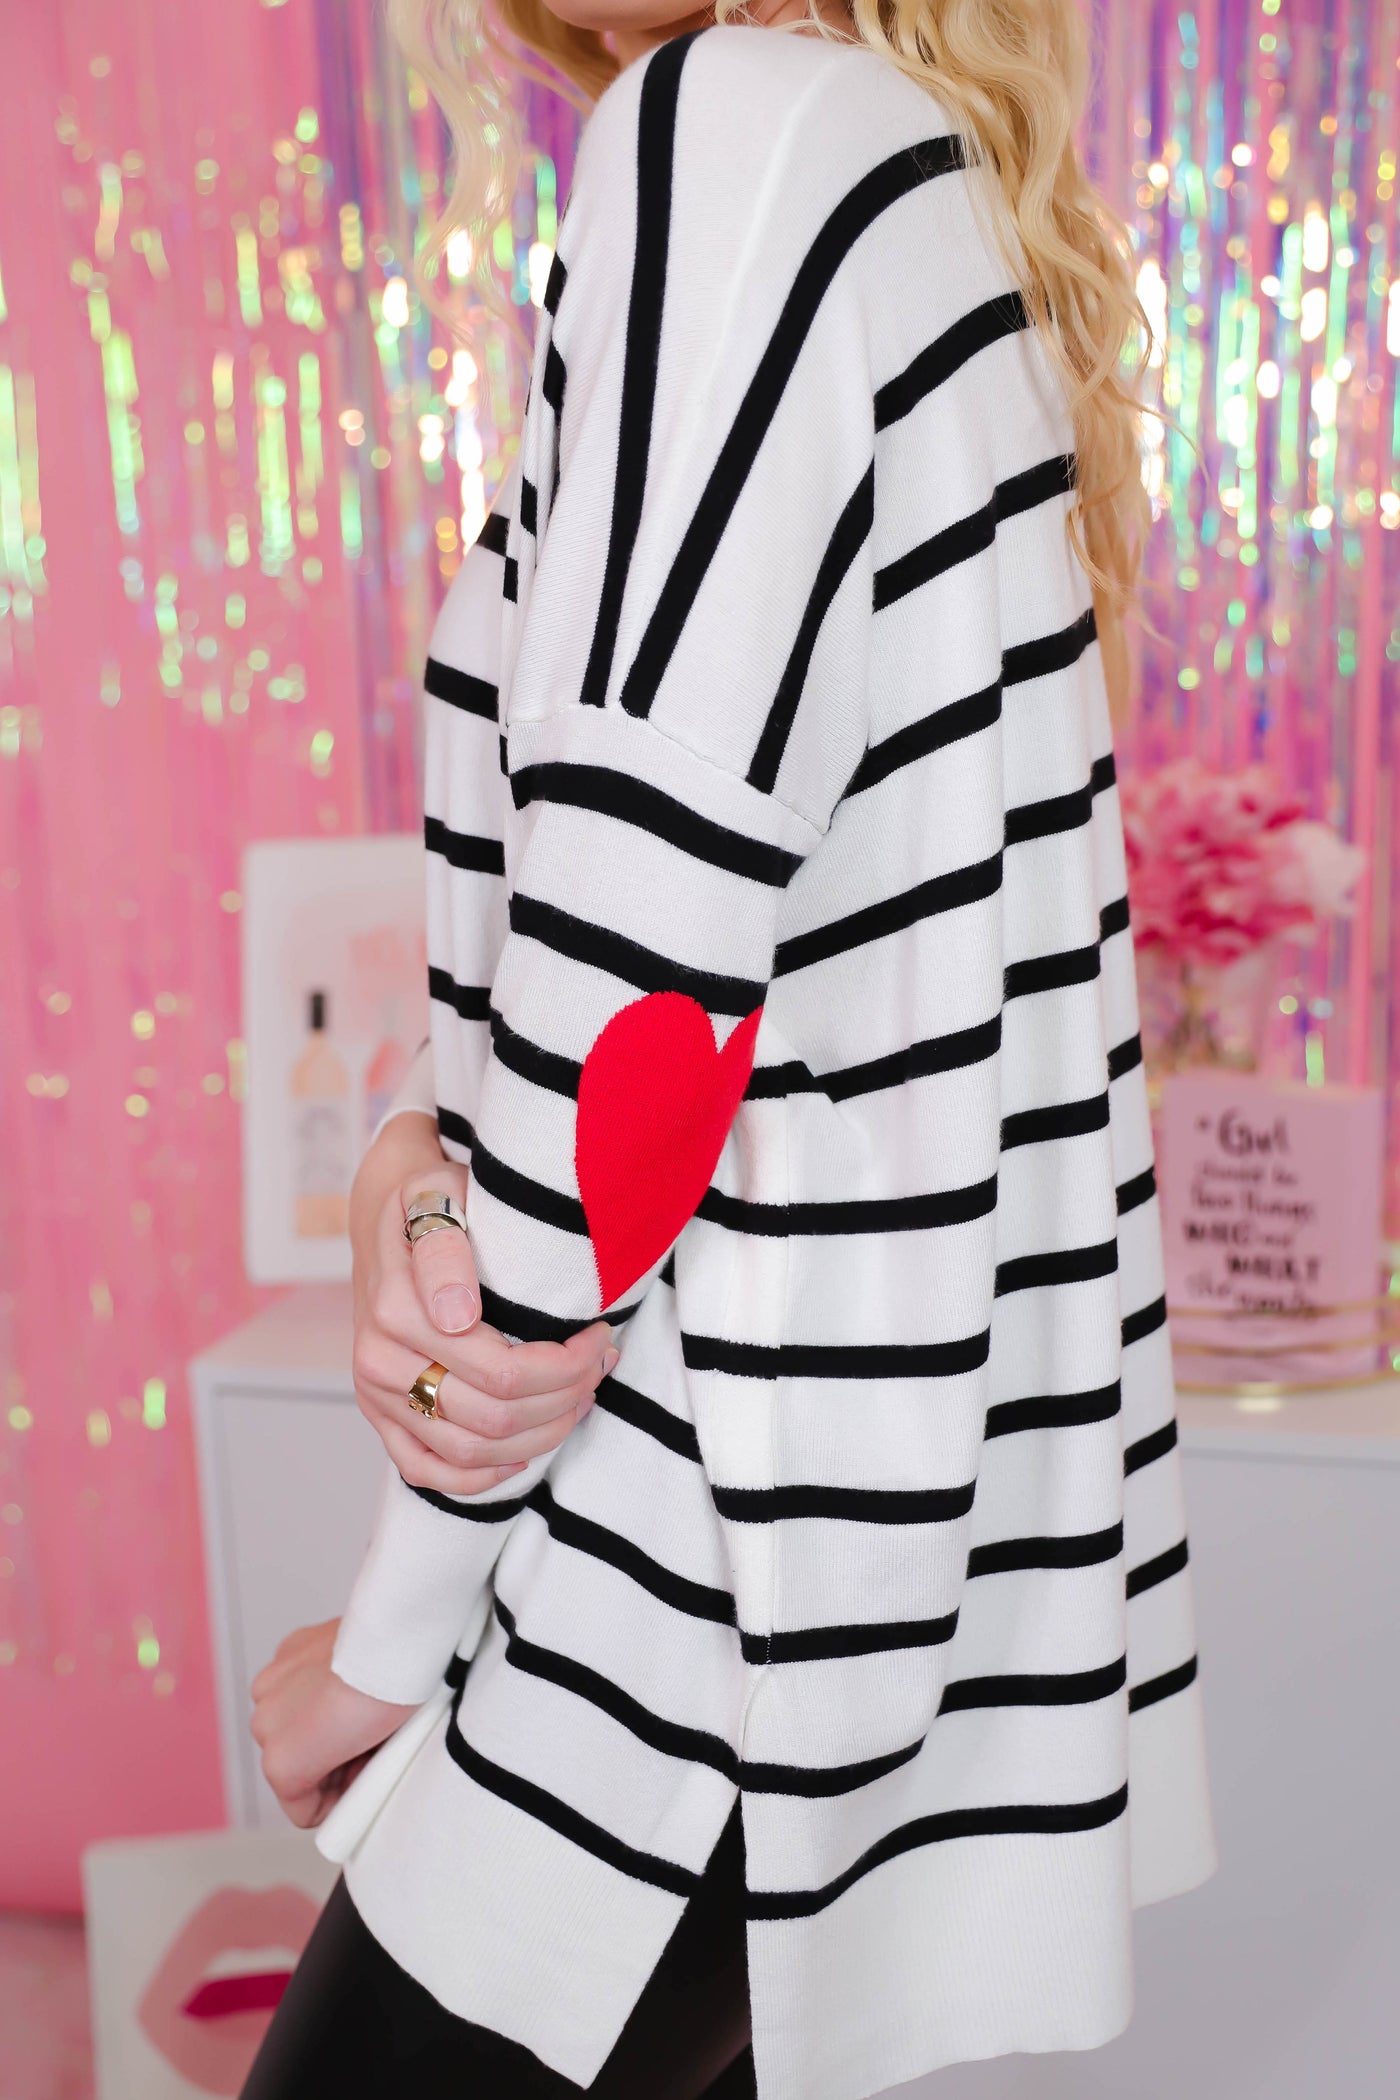 Black and White Striped Sweater with Heart Shaped Elbow Patches- Striped Sweater with Elbow Patches- Preppy Sweater